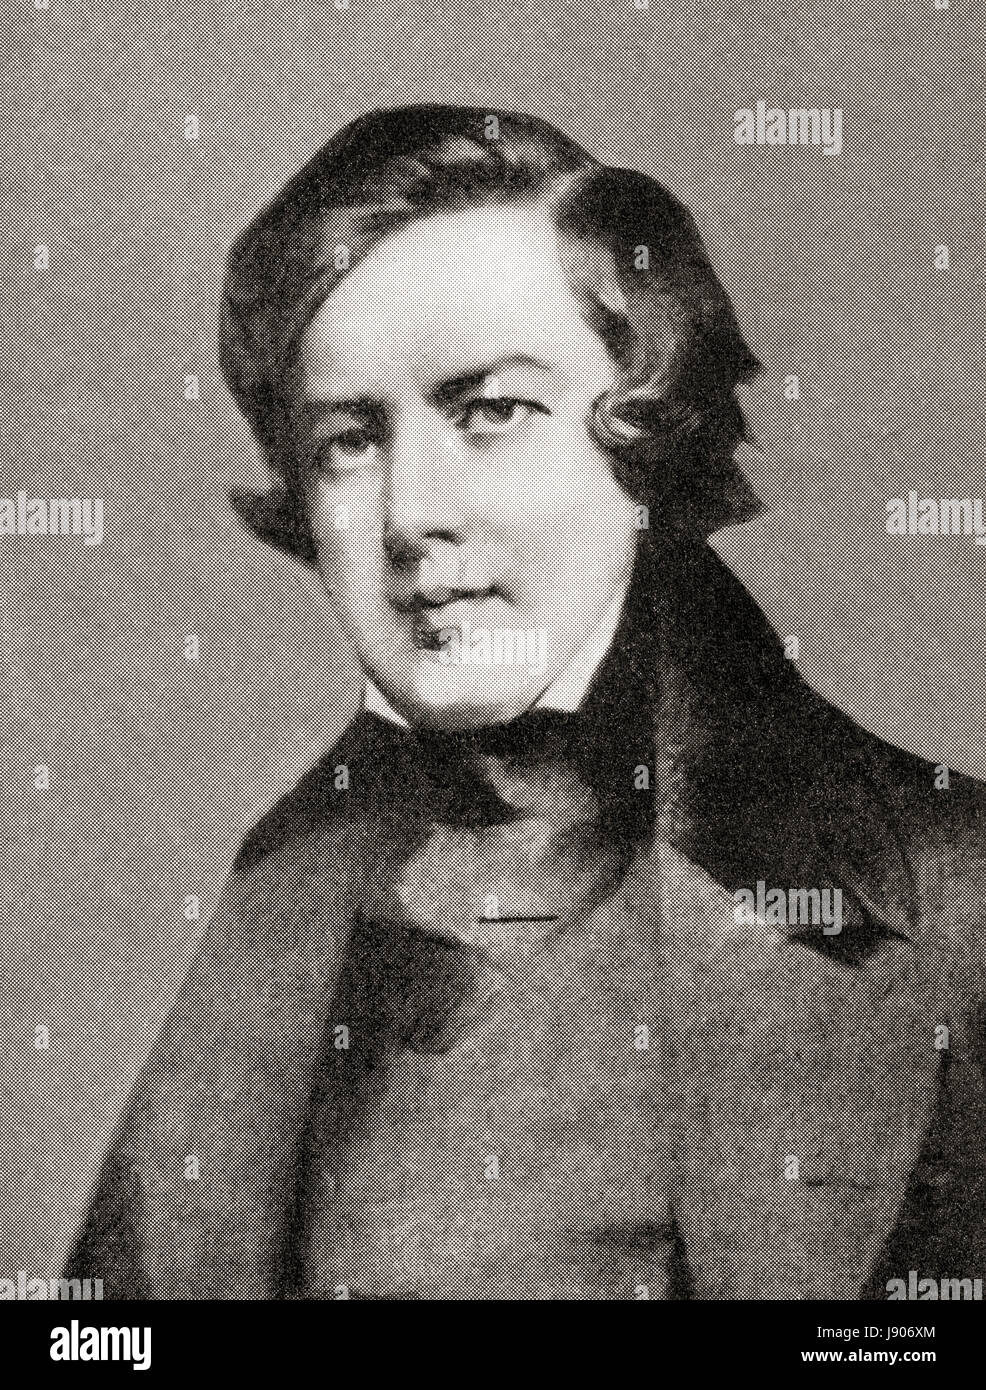 Robert Schumann, 1810 –1856.  German composer and music critic.  From Hutchinson's History of the Nations, published 1915. Stock Photo